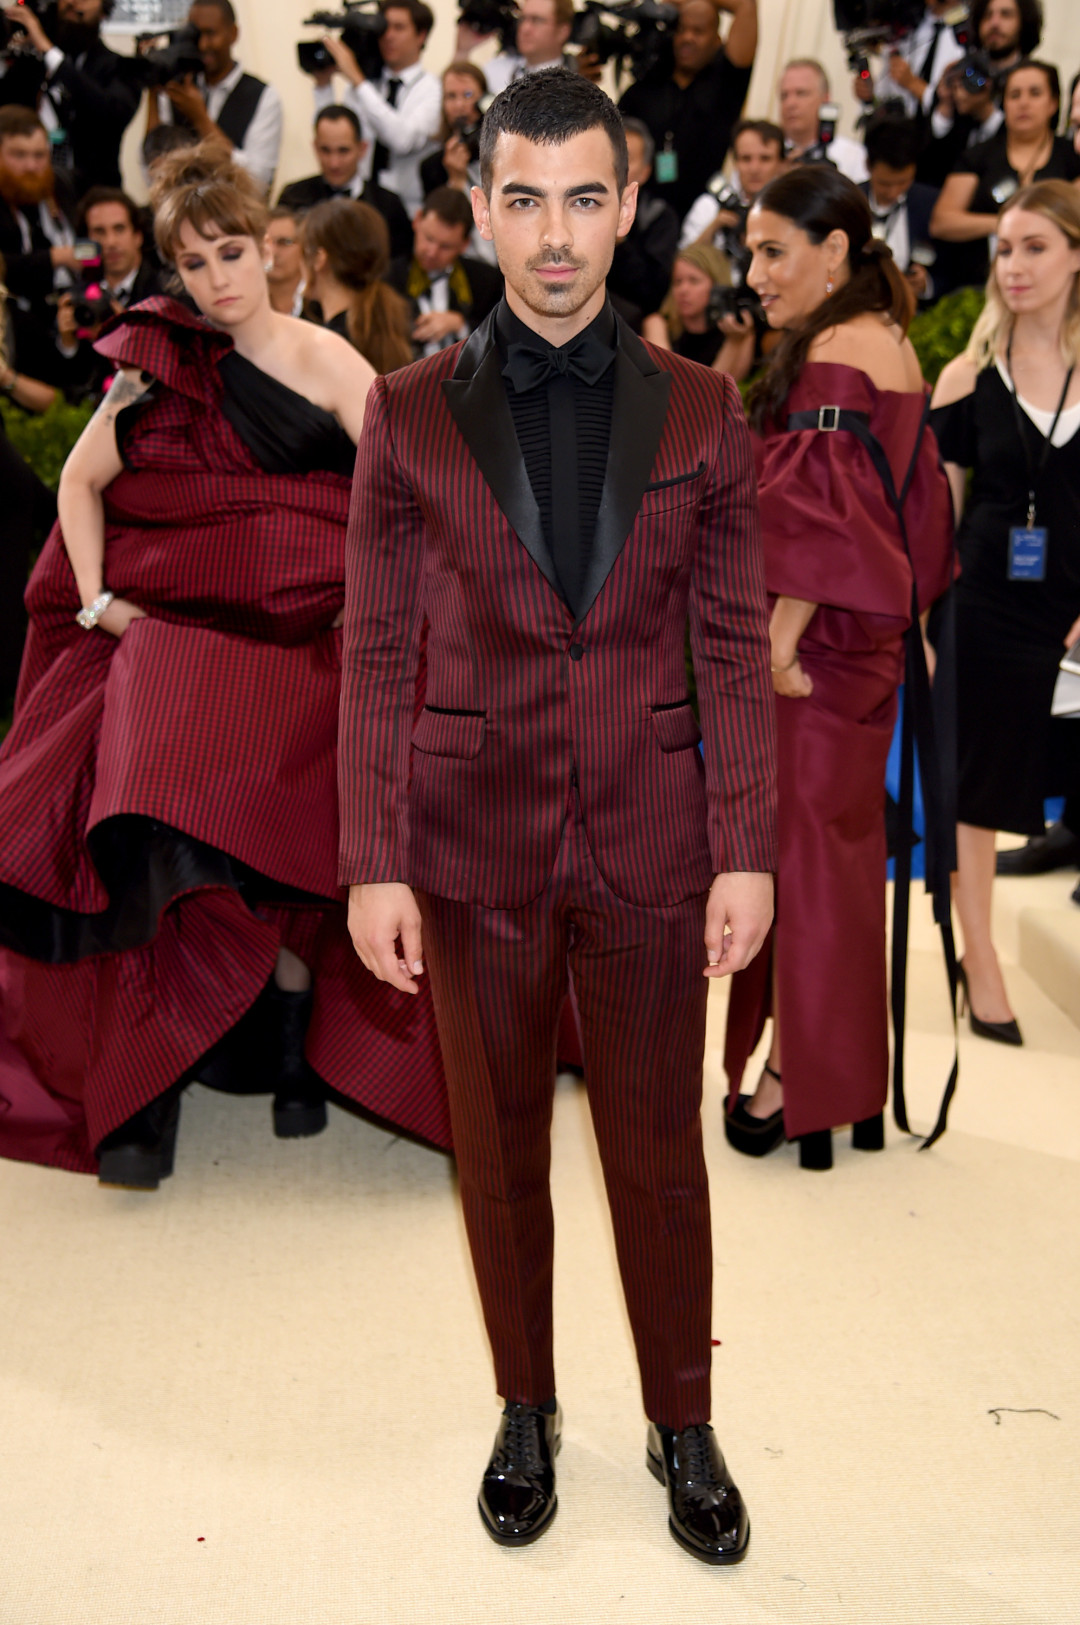 The most memorable Met Gala men's fashion looks in recent years